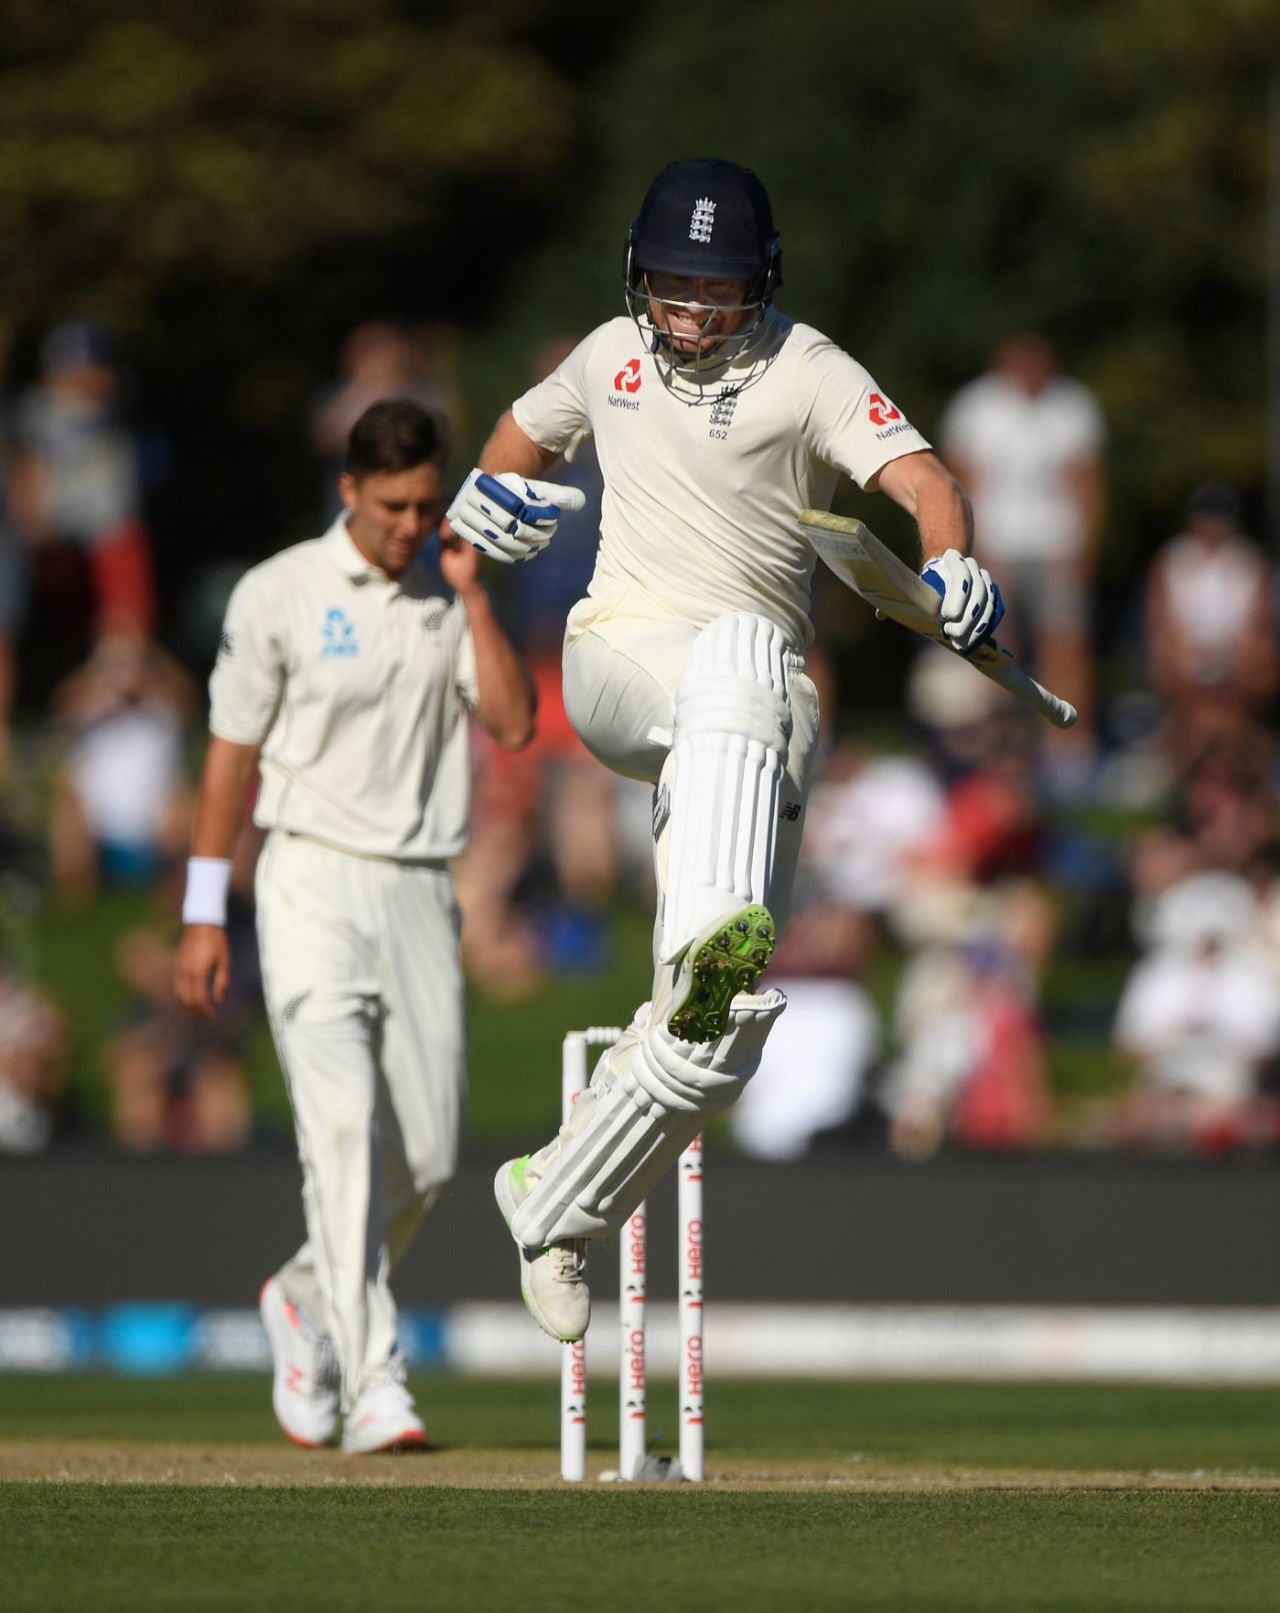 Jonny Bairstow punches the air as he runs through to reach three figures, New Zealand v England, 2nd Test, Christchurch, 2nd day, March 31, 2018